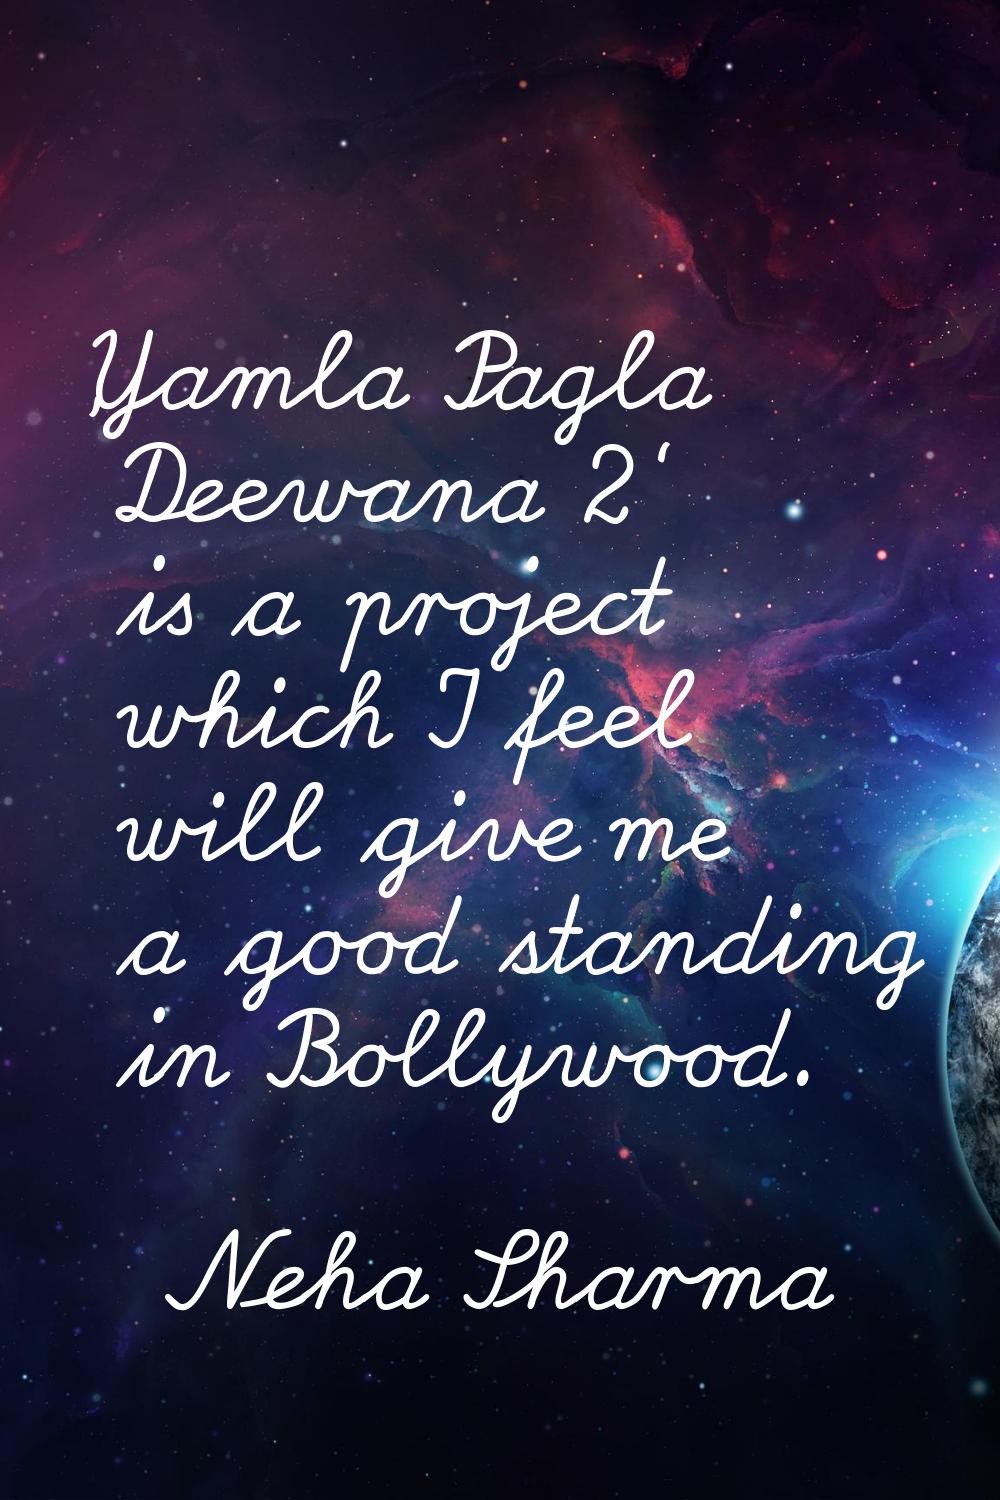 'Yamla Pagla Deewana 2' is a project which I feel will give me a good standing in Bollywood.